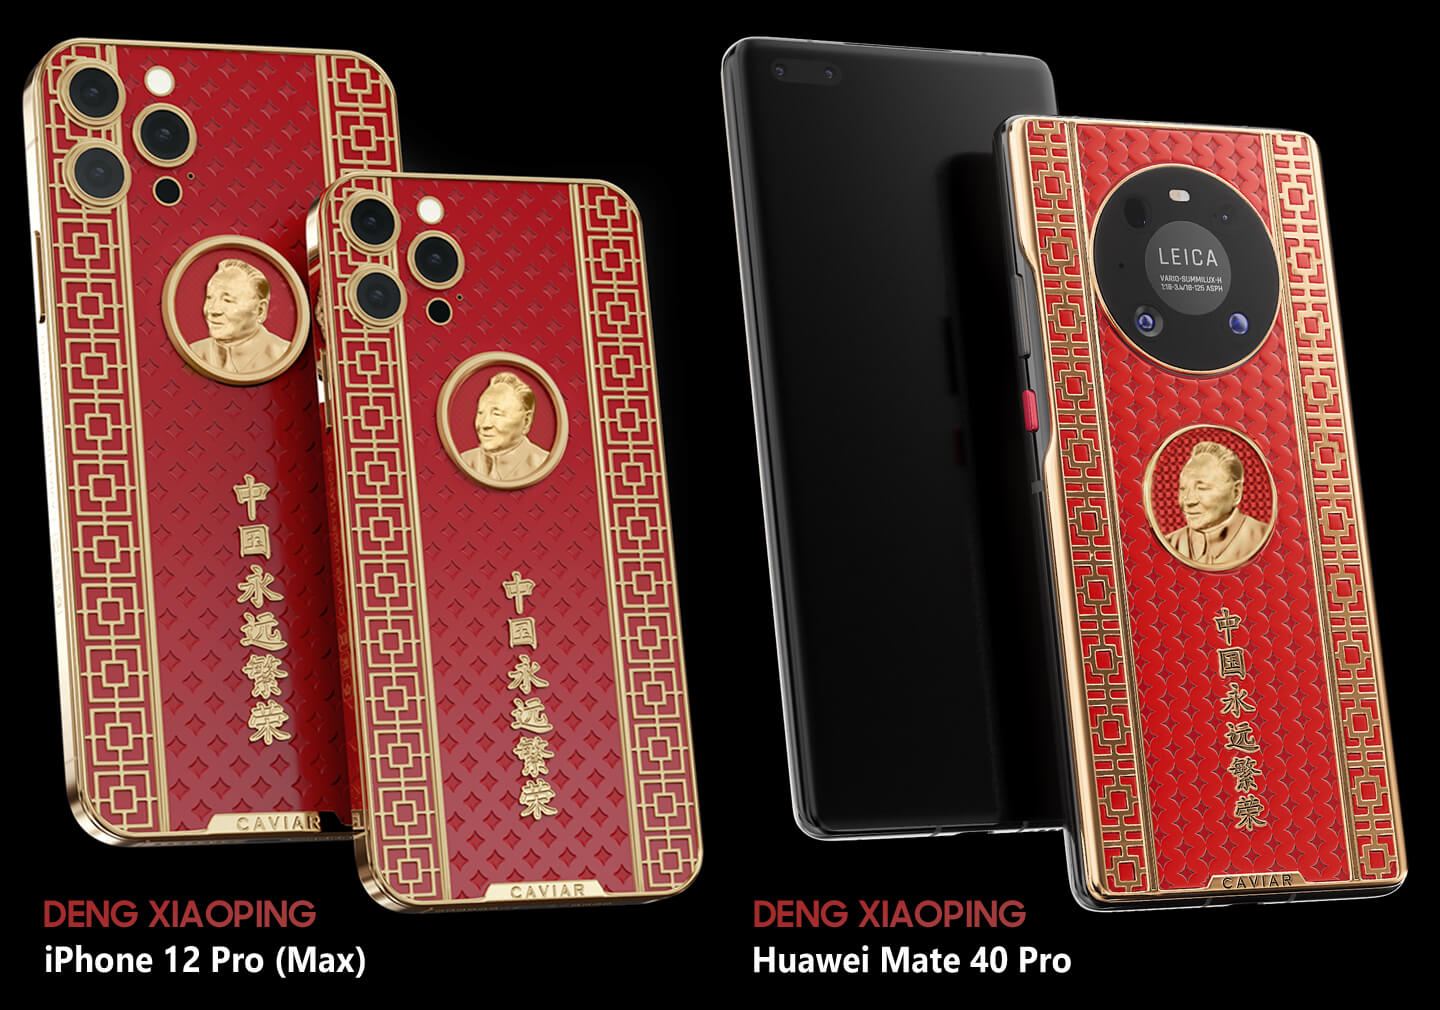 Limited Edition smartphone